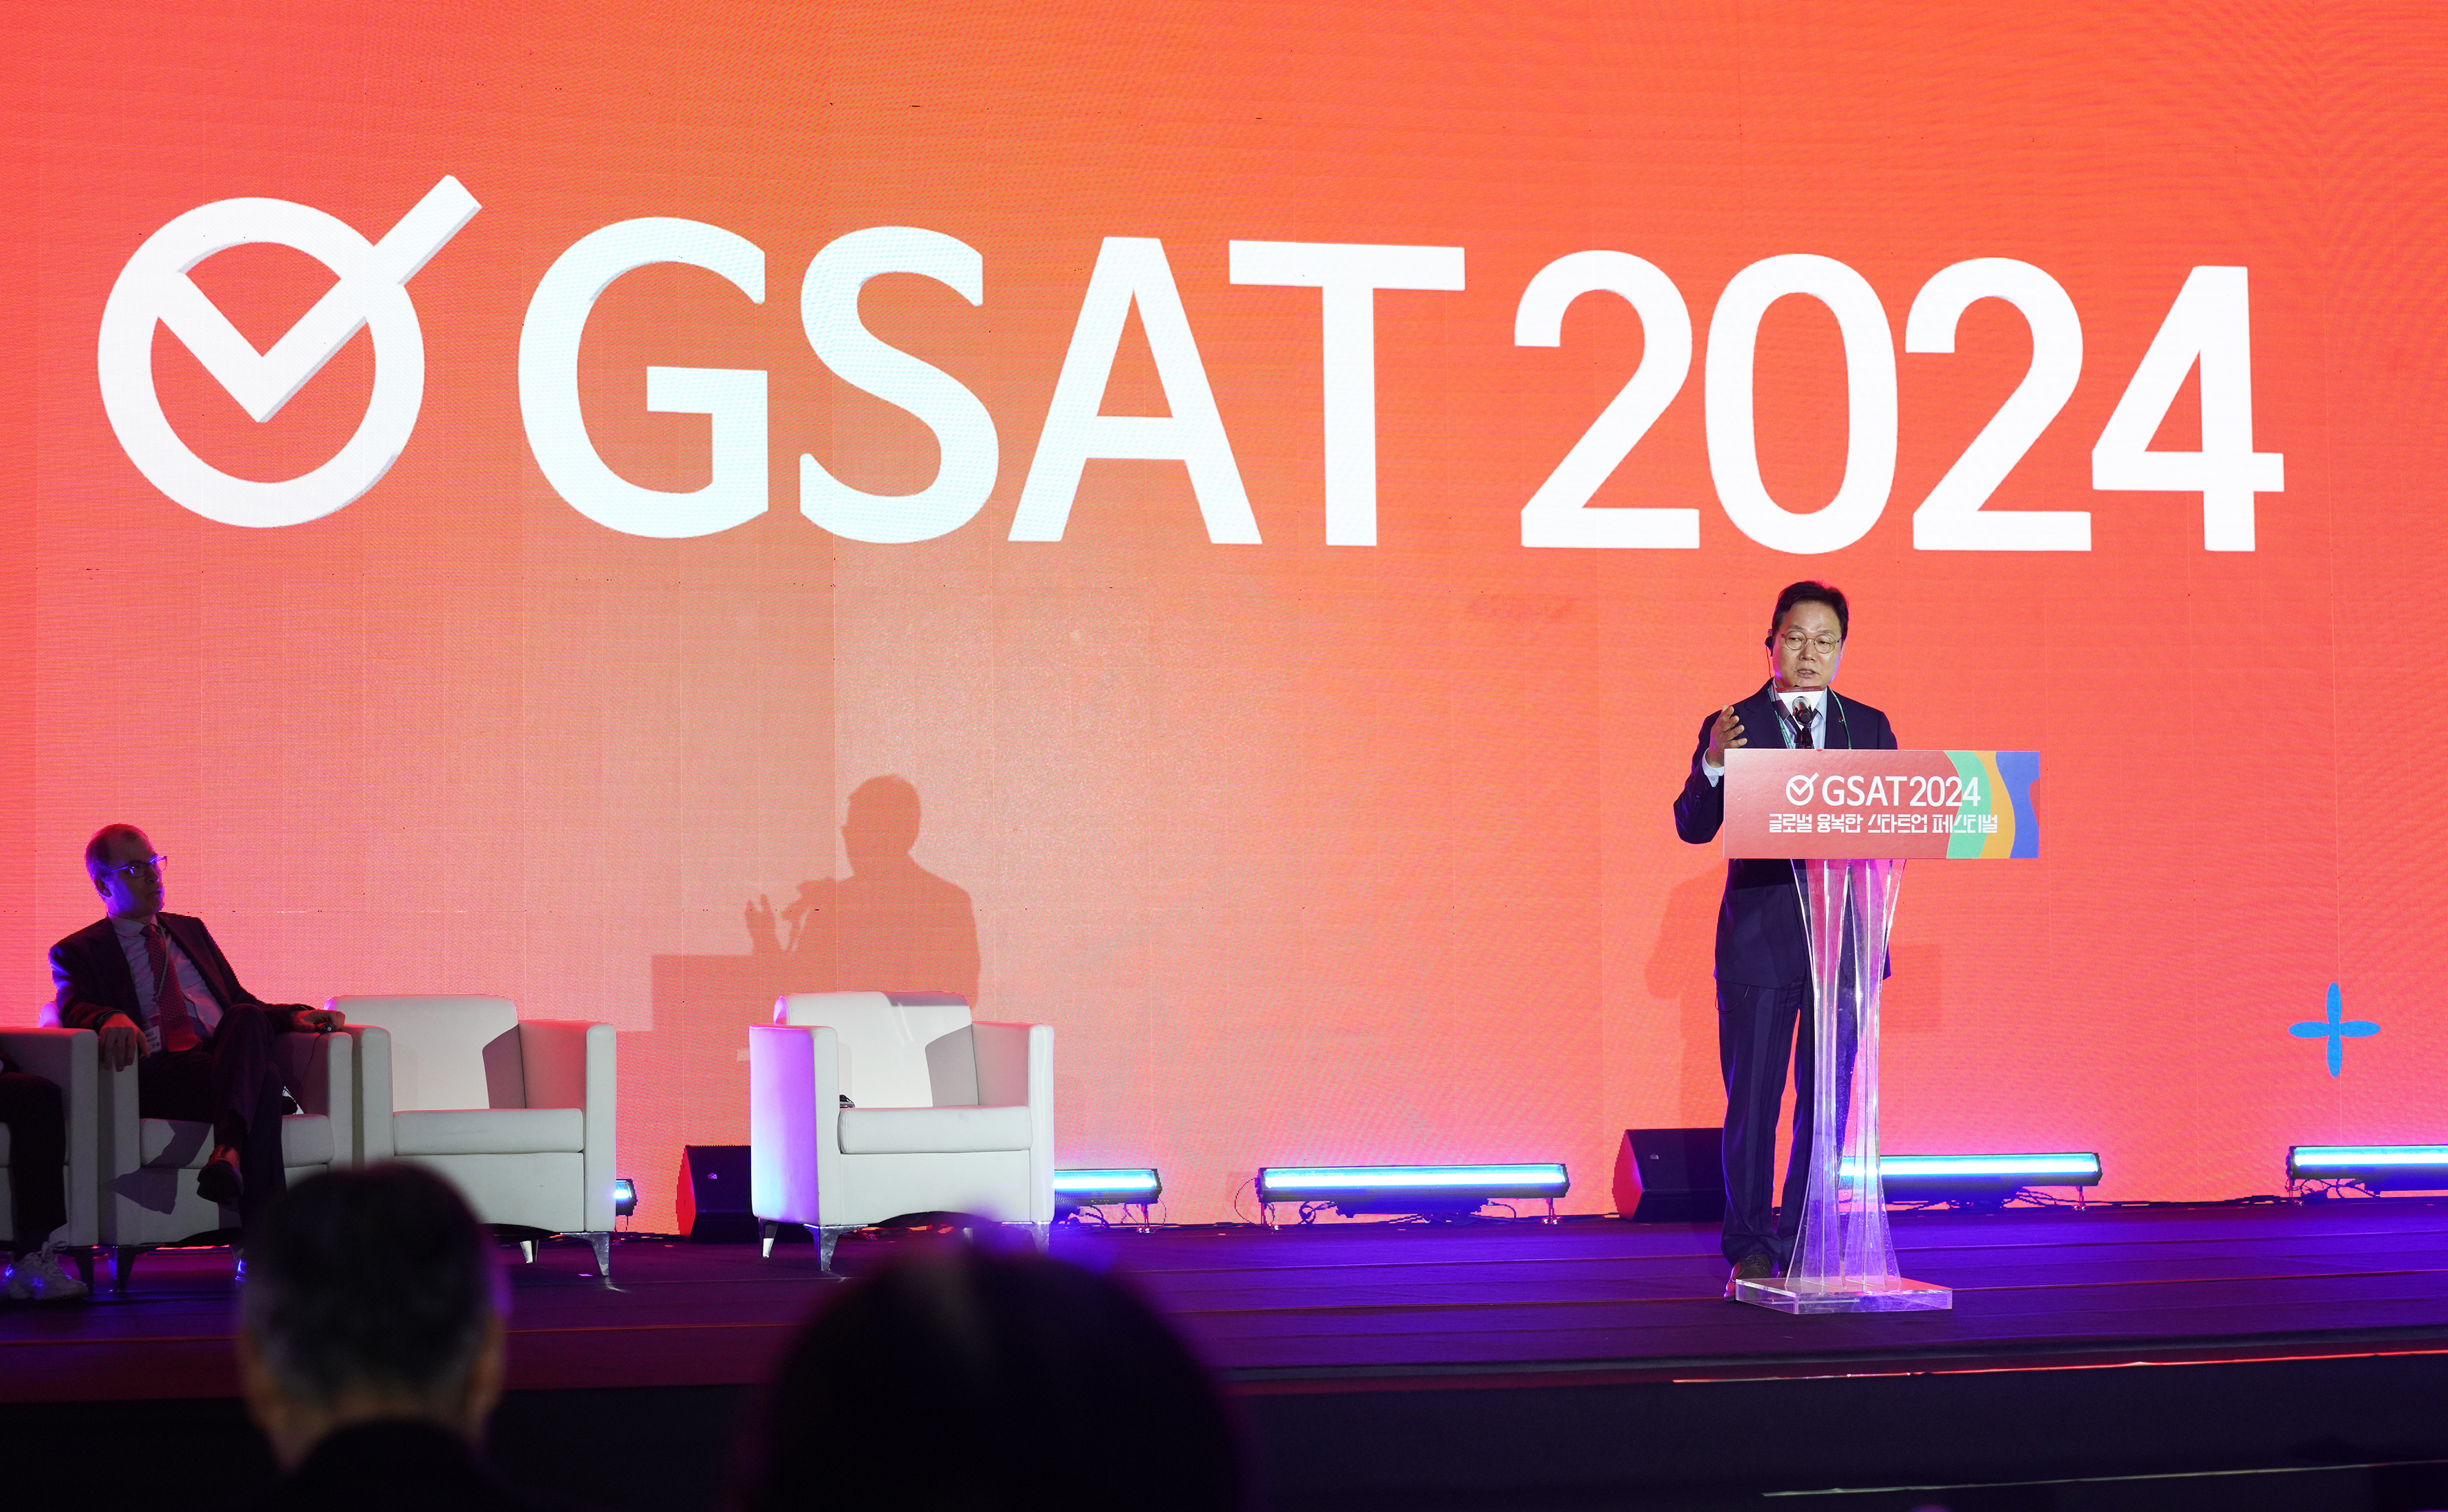 GSAT 2024 Festival Opens for a Fusion of Global Startups Gathering “the Firsts and the Bests” in One Placefiles image